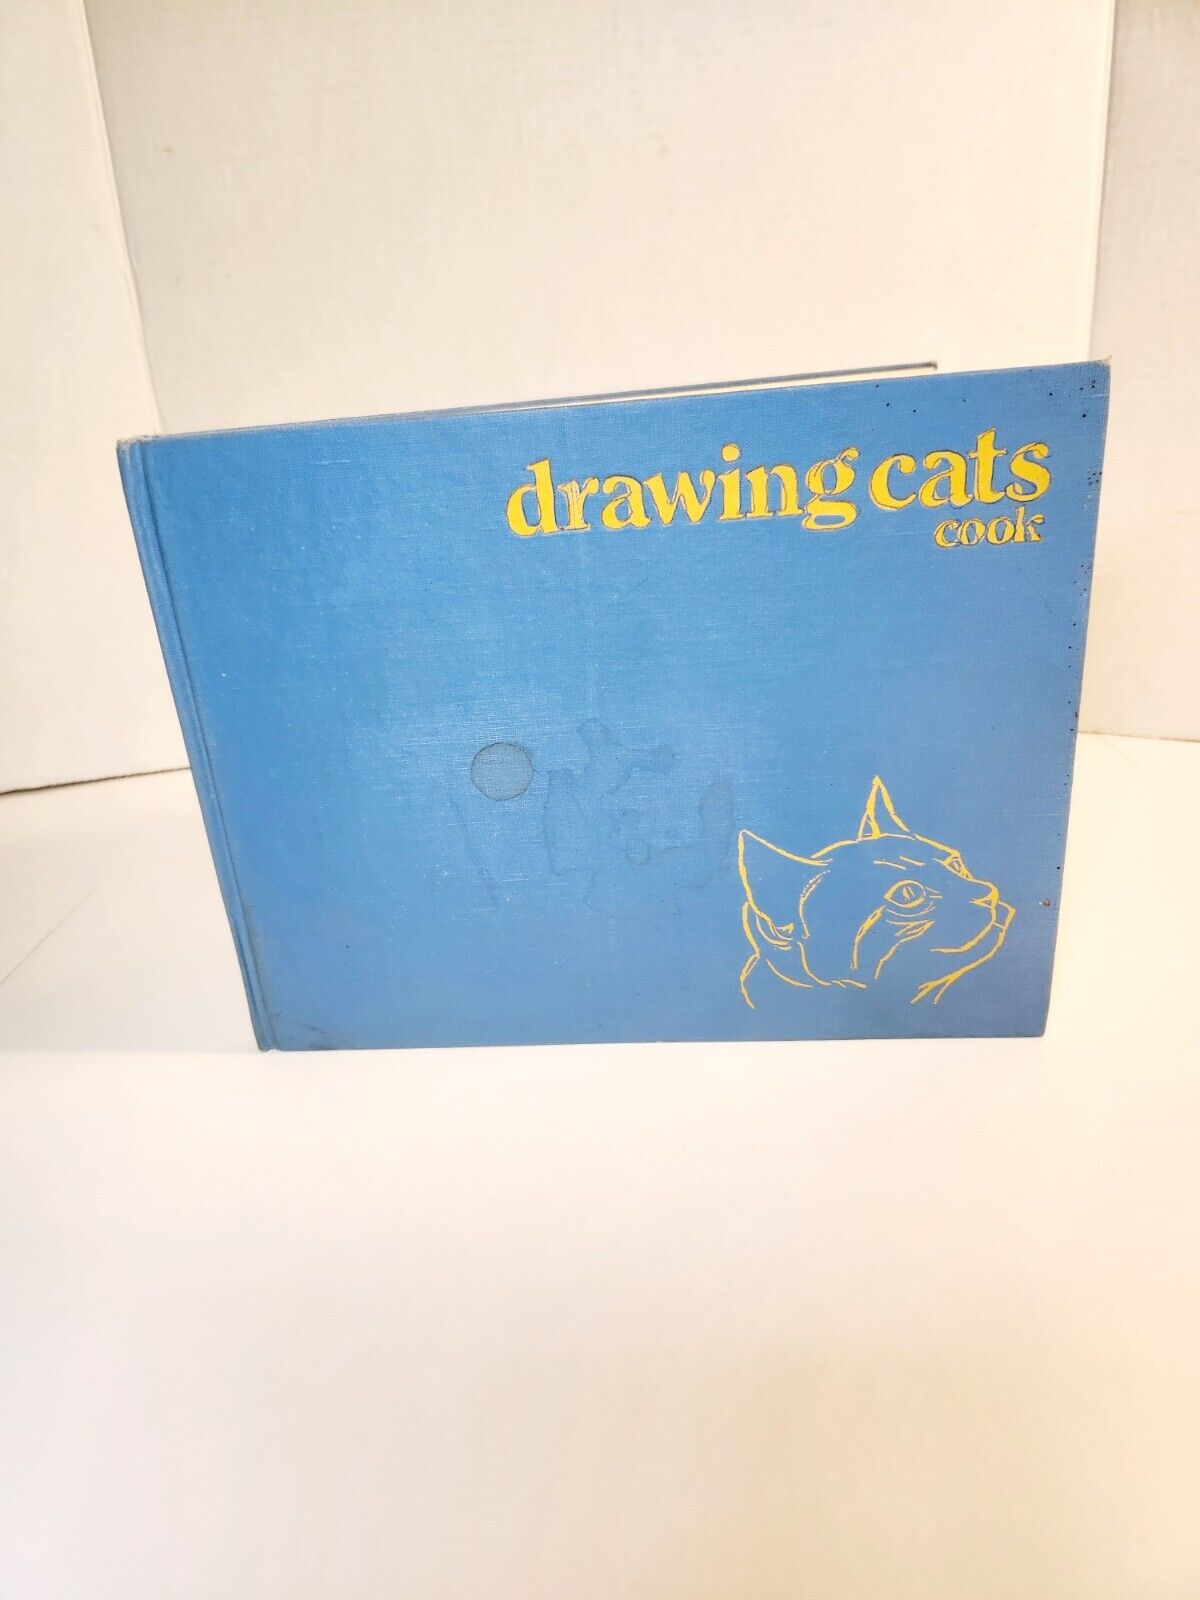 DRAWING CATS BY GLADYS EMERSON COOK PITMAN Hardcover 1958. Minor Water Spots. 